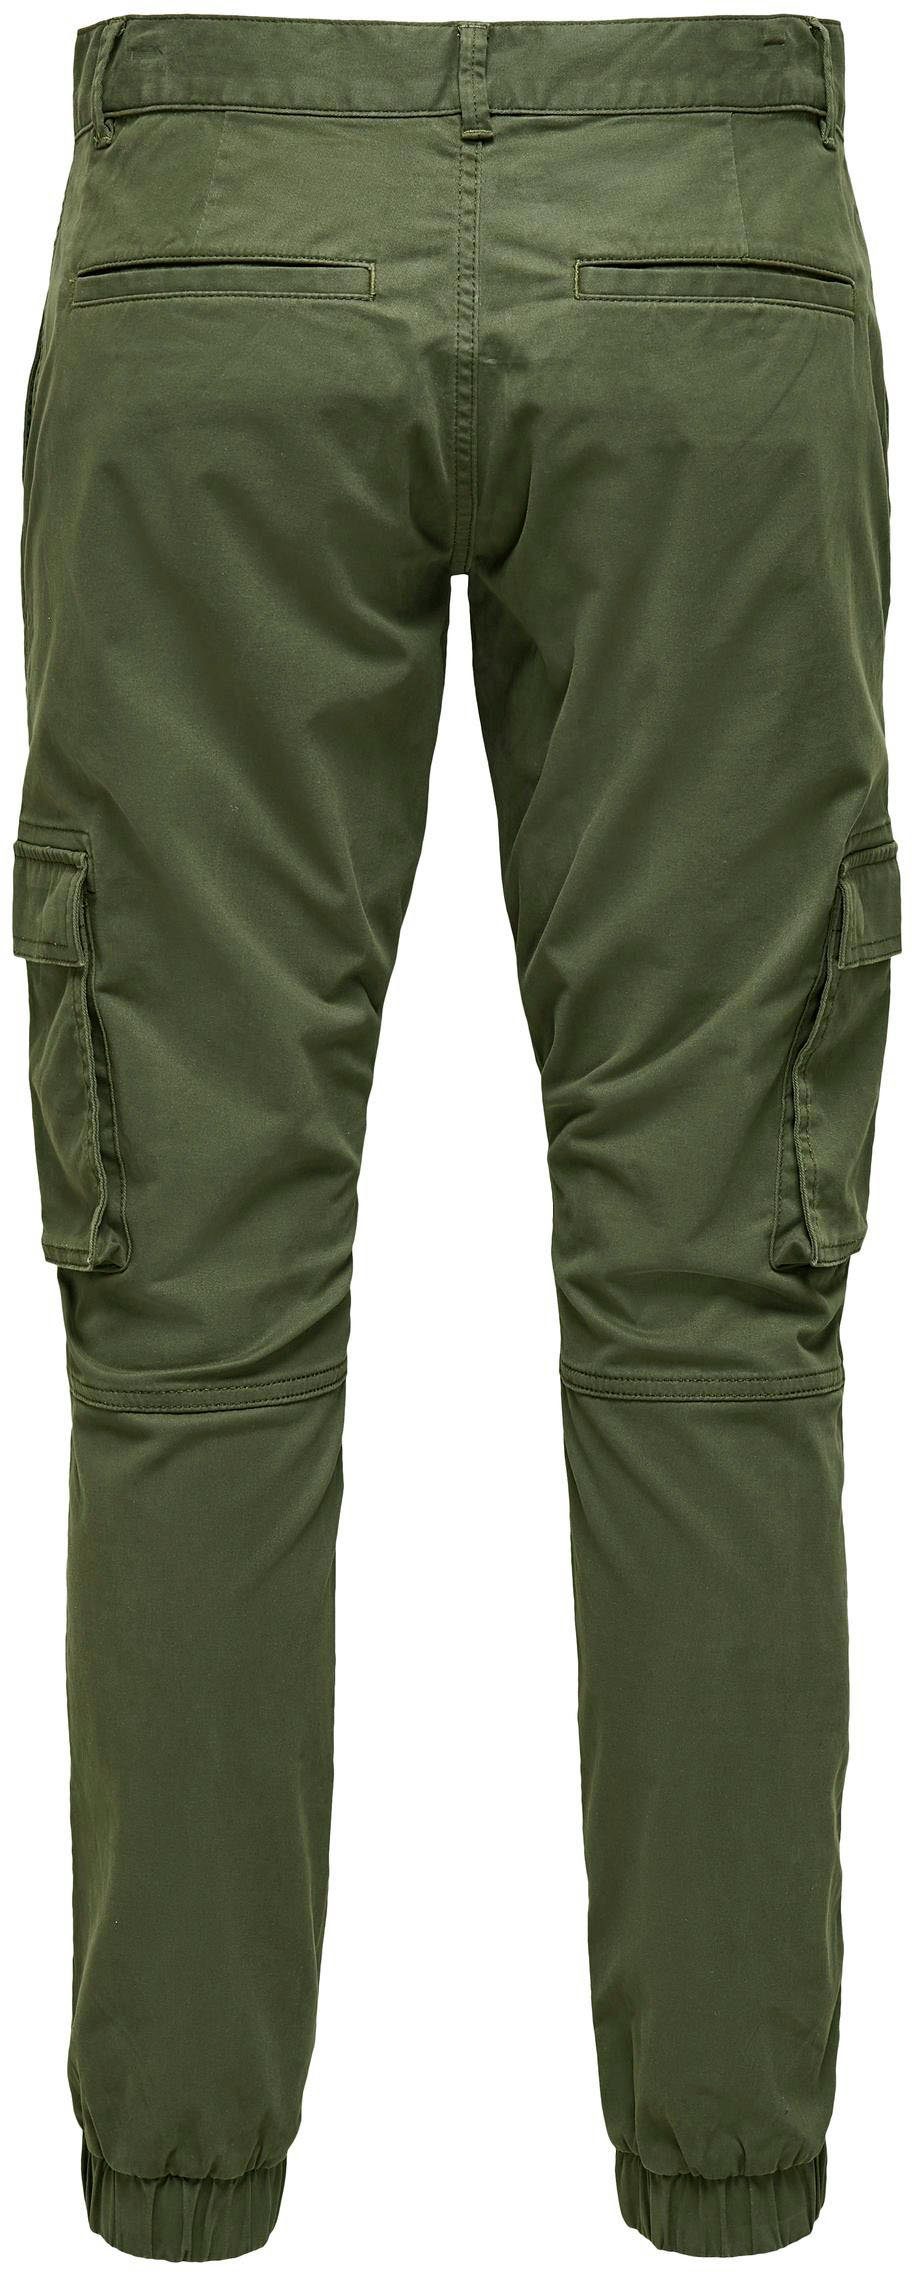 ONLY & SONS Cargohose olivgrün CAM CUFF CARGO STAGE